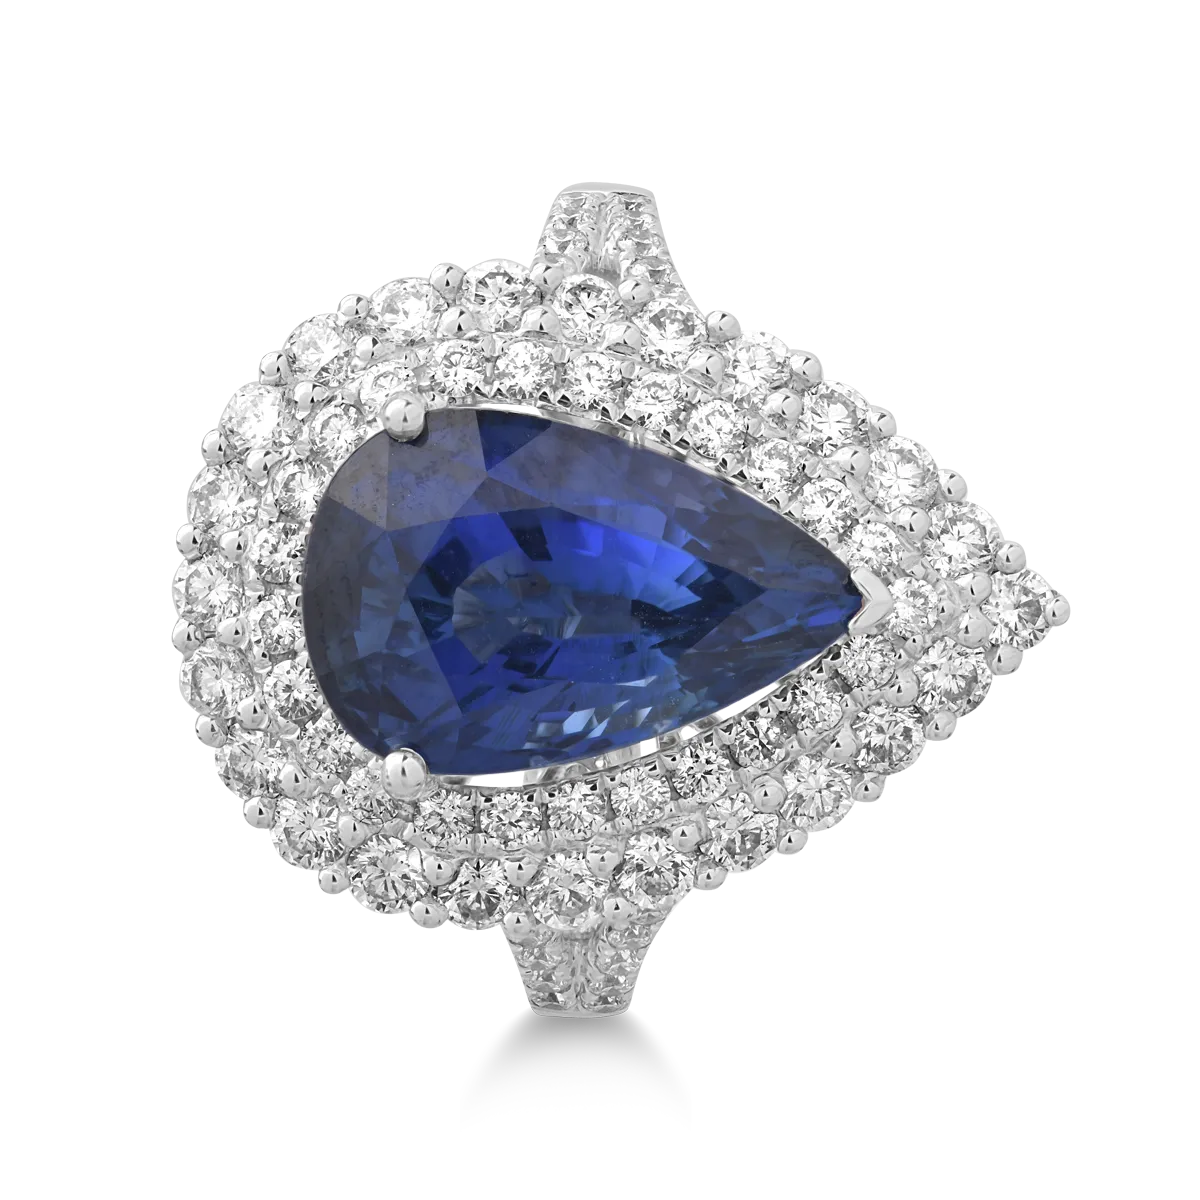 18K white gold ring with 6.25ct sapphire and 1.23ct diamonds